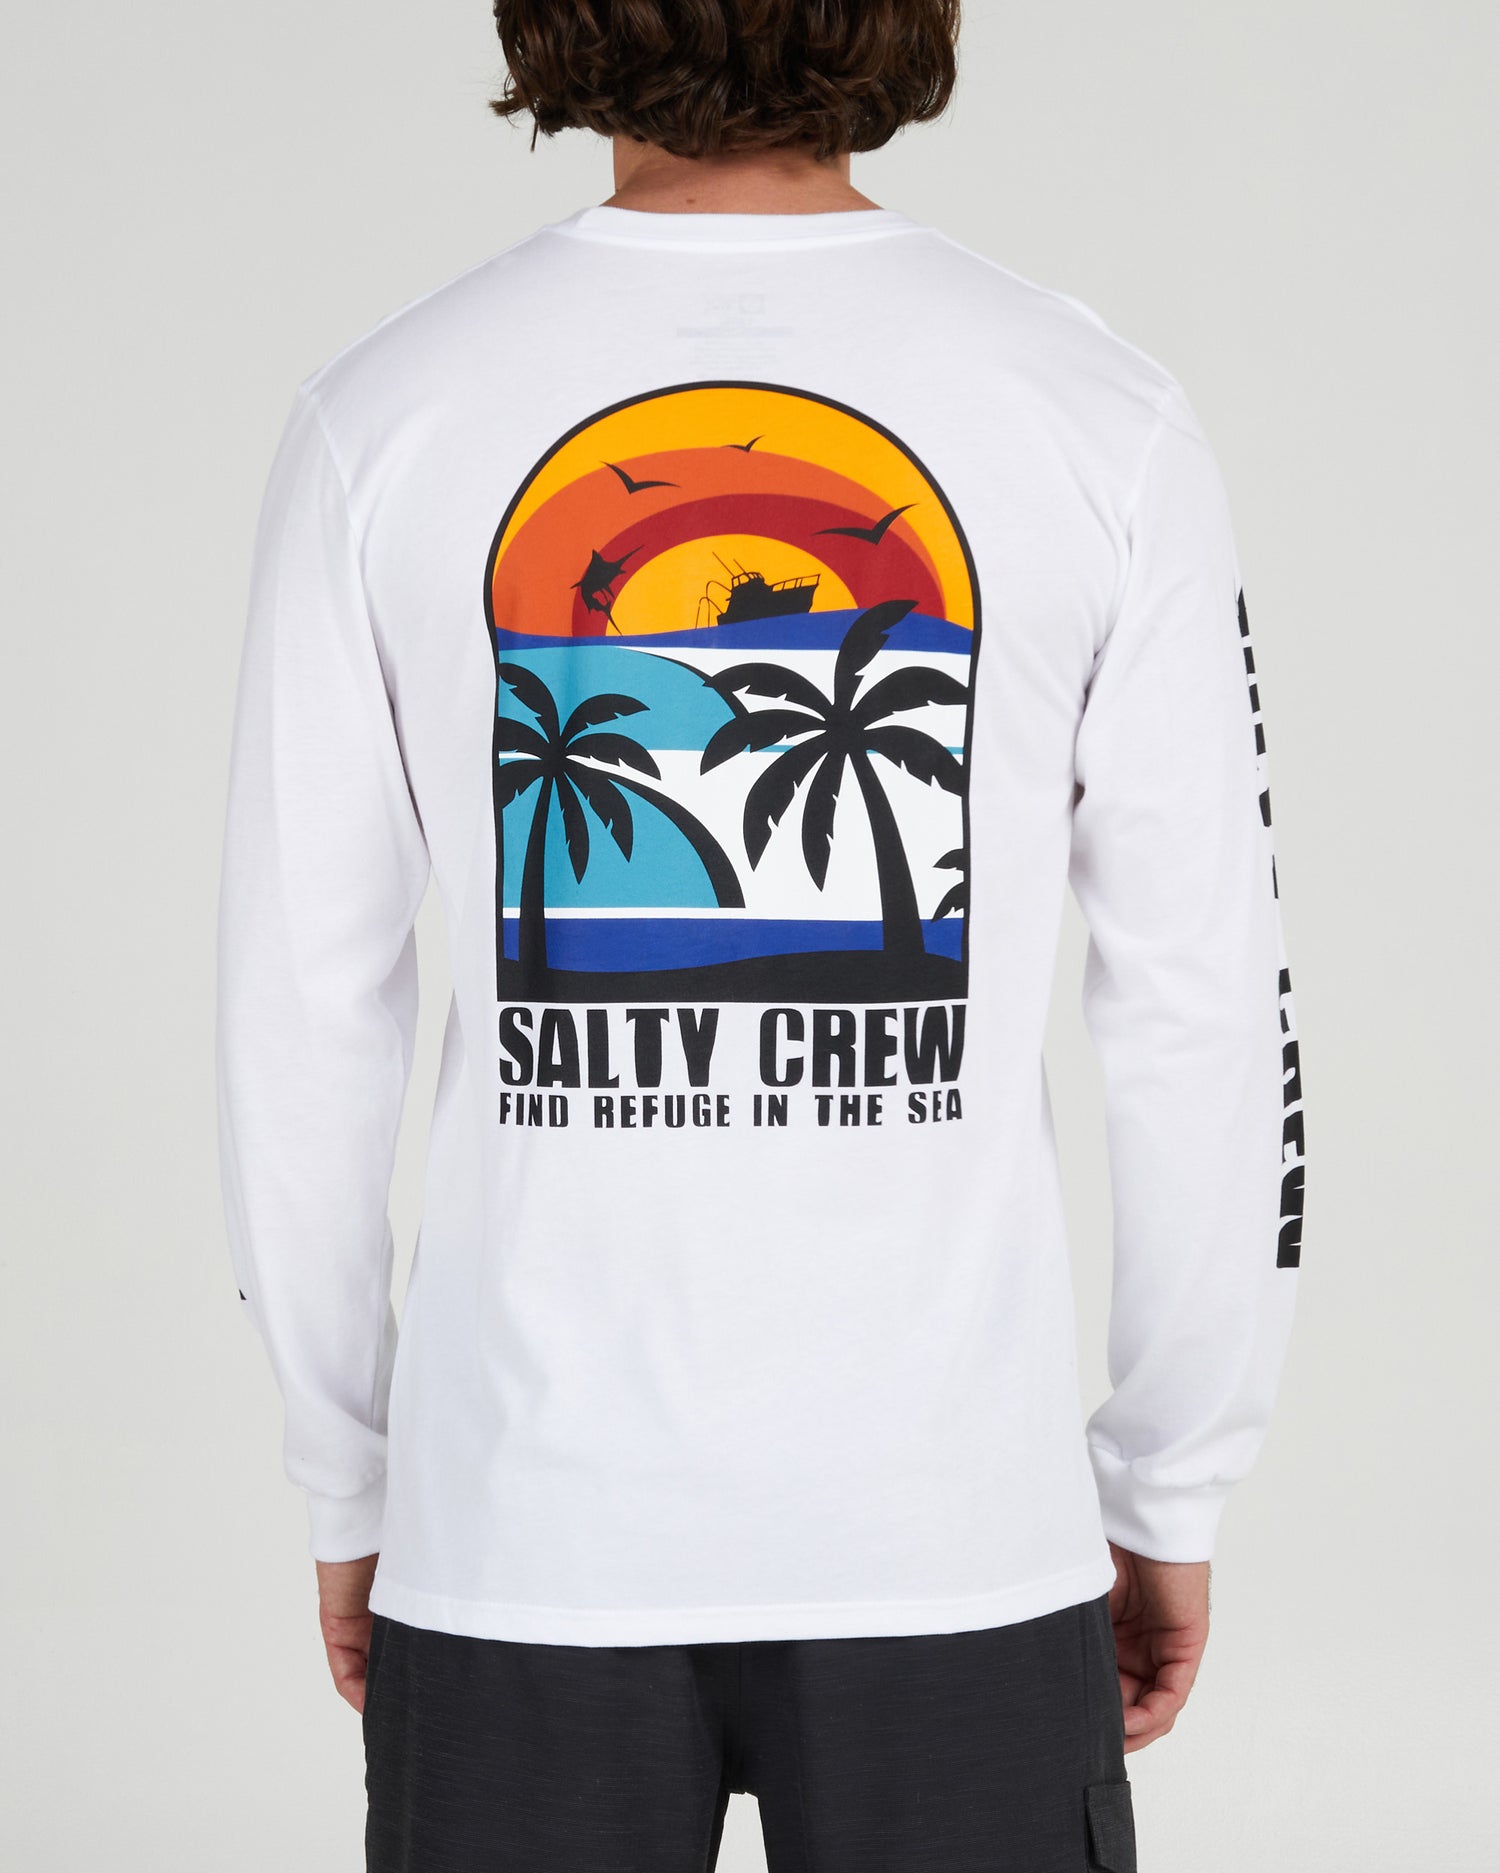 On body back of the Beach Day White L/S Premium Tee